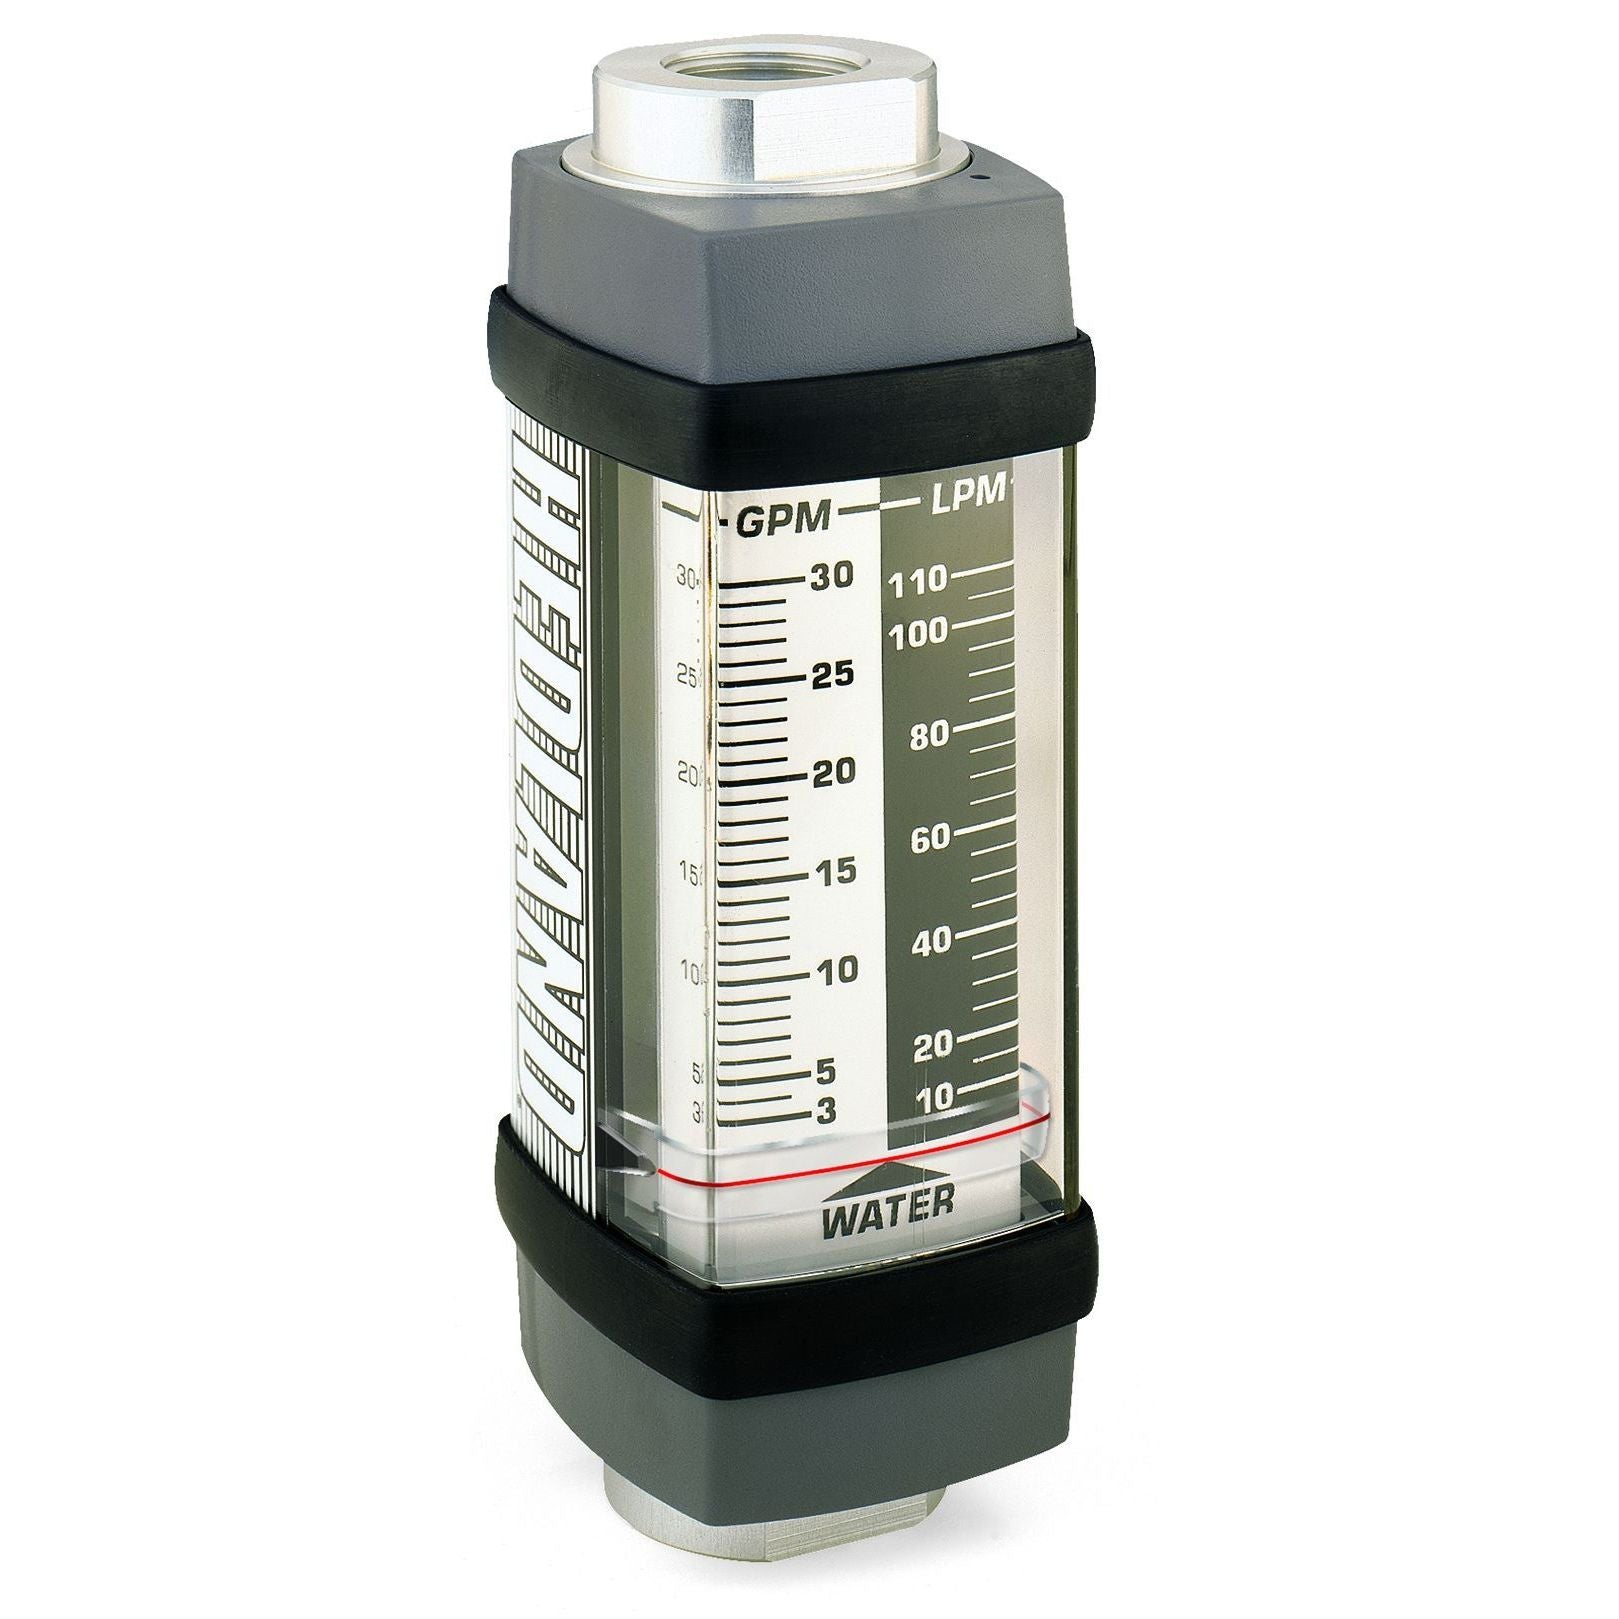 H844X-075 : Hedland 5000psi 316SS Flow Meter for Caustic or Corrosive Liquids, 1 NPT, 10 to 75 GPM